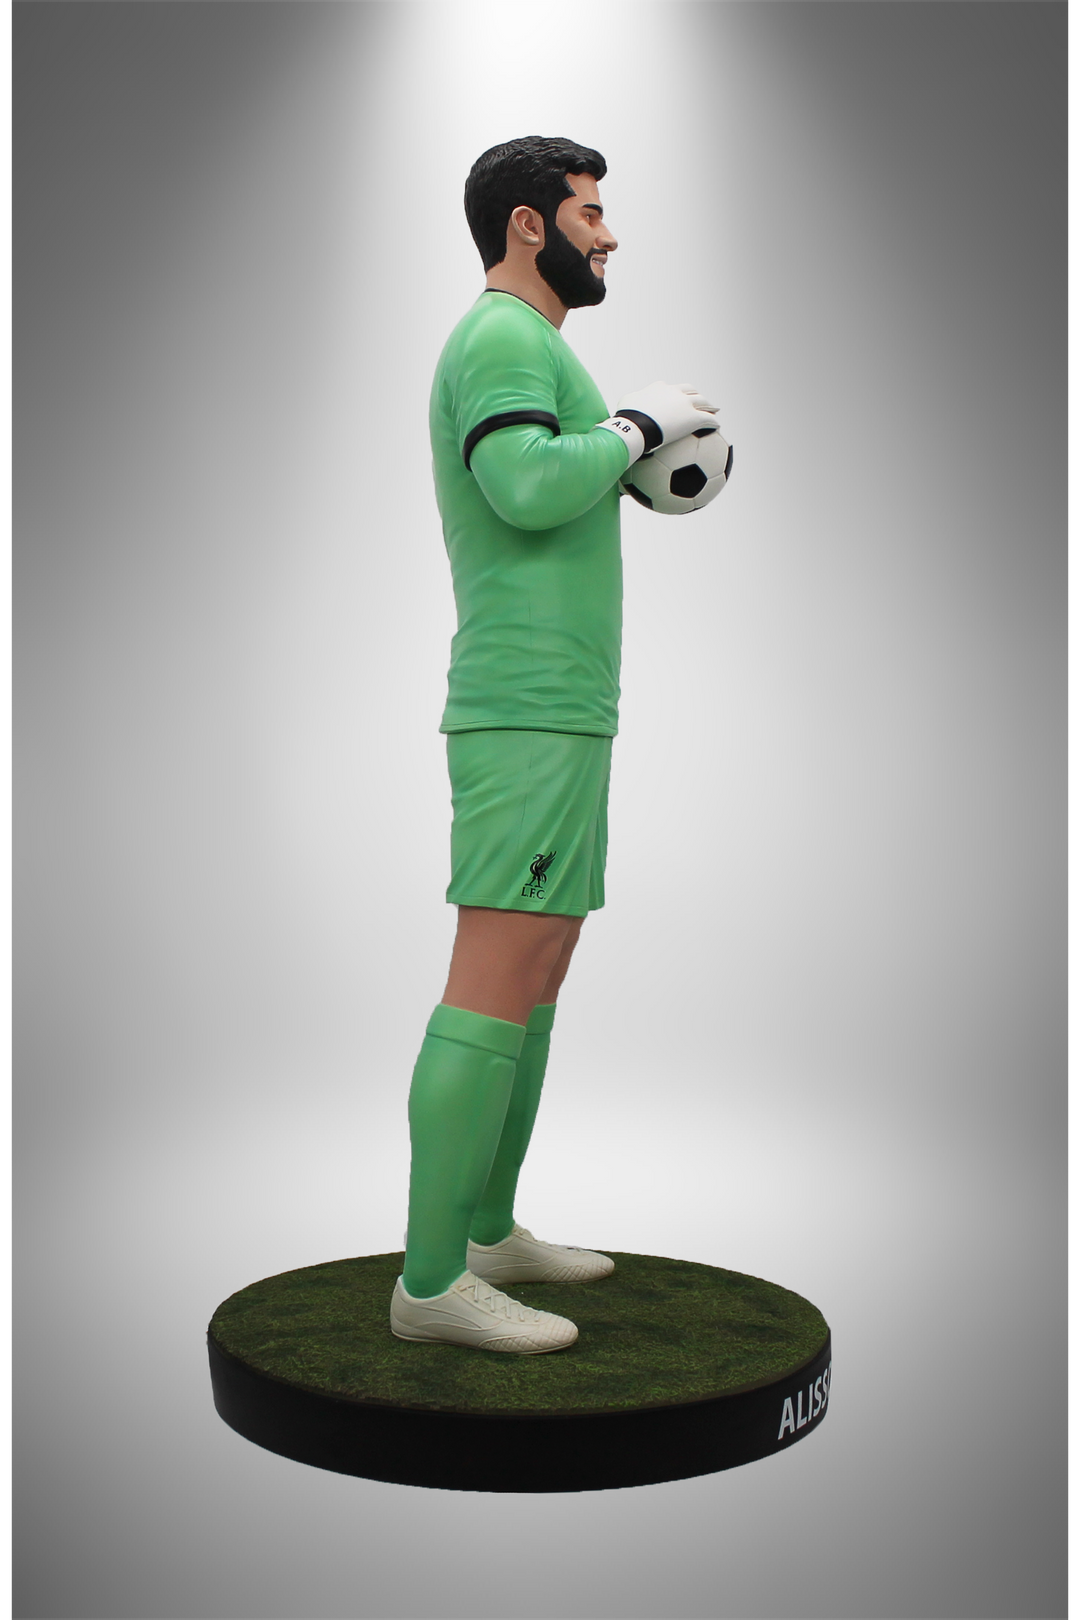 Alisson Becker - Official Liverpool FC - Football's Finest 60cm Resin Statue